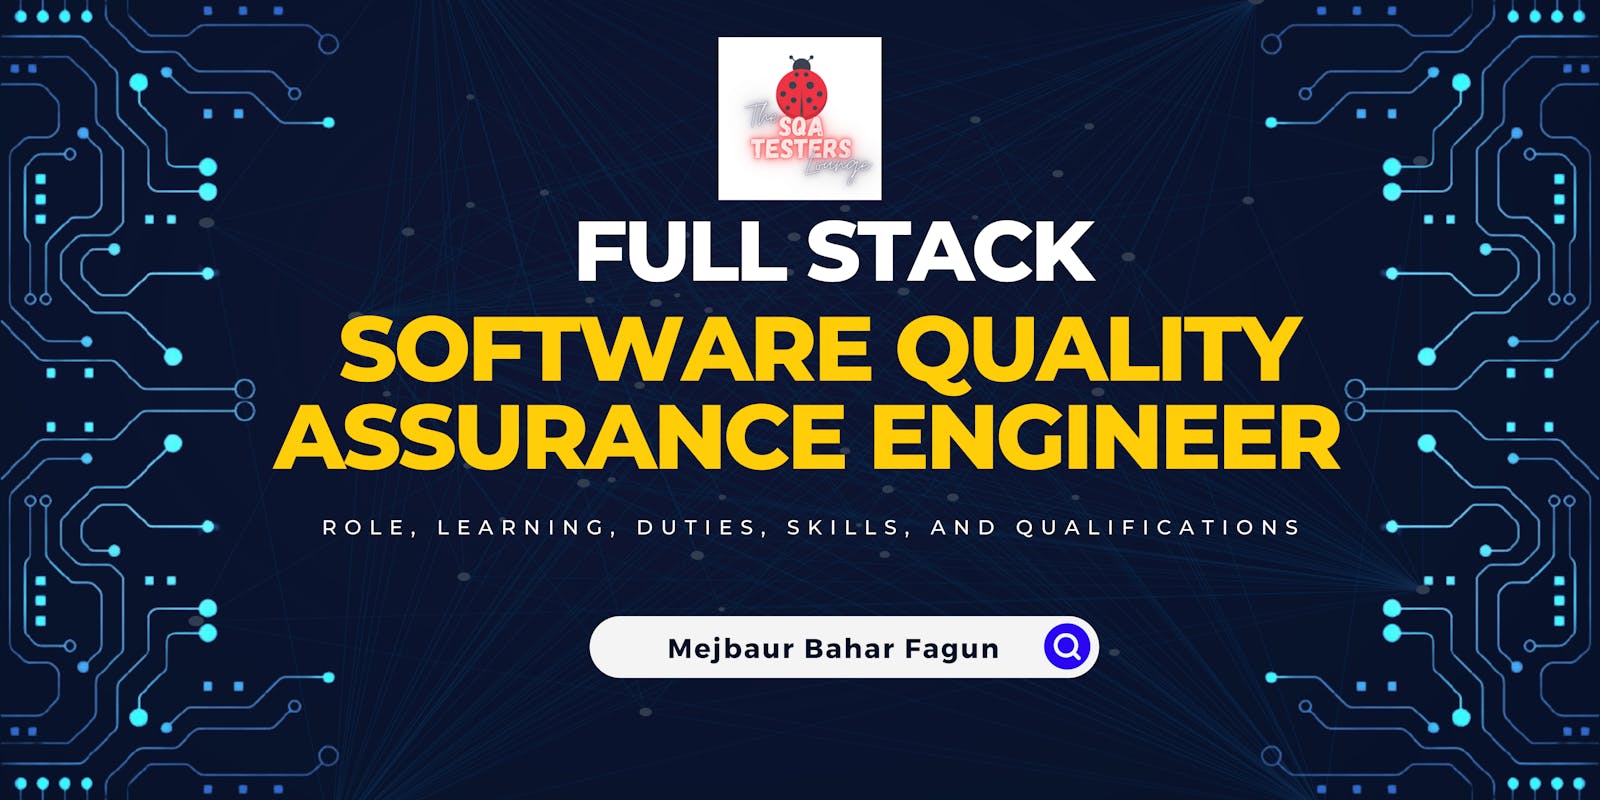 Full Stack Software Quality Assurance Engineer - Role, Learning, Duties, Skills, and Qualifications